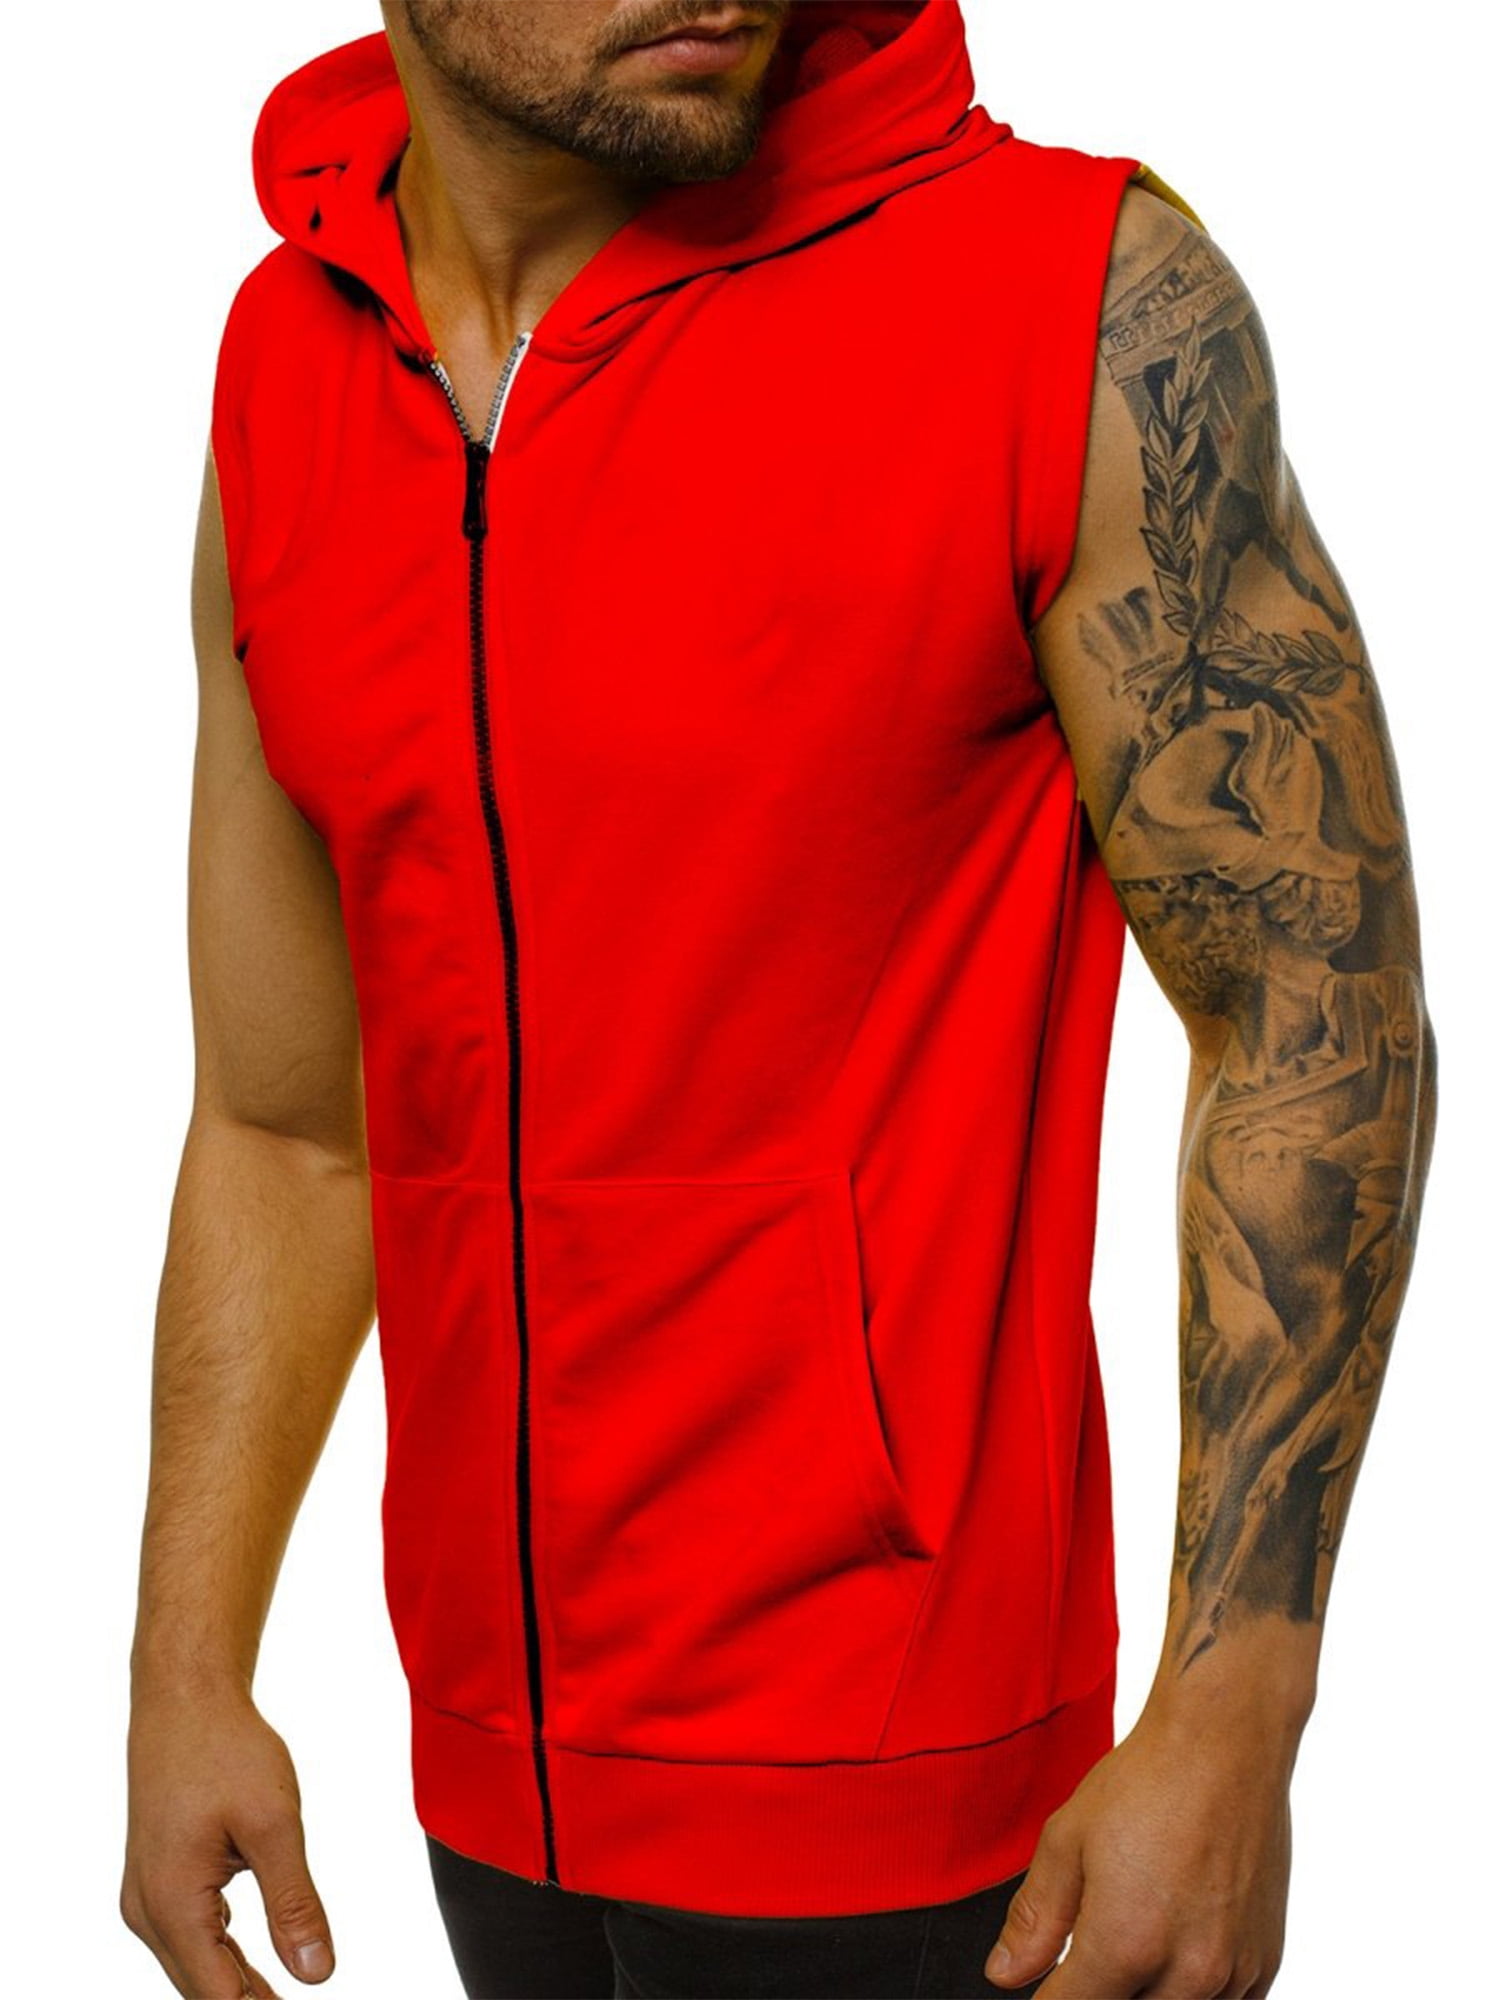 COOFANDY Men's Workout Hoodie Tank Top Sleeveless Gym Hooded Cut Off Shirt Lace-up Bodybuilding Muscle T Shirts 